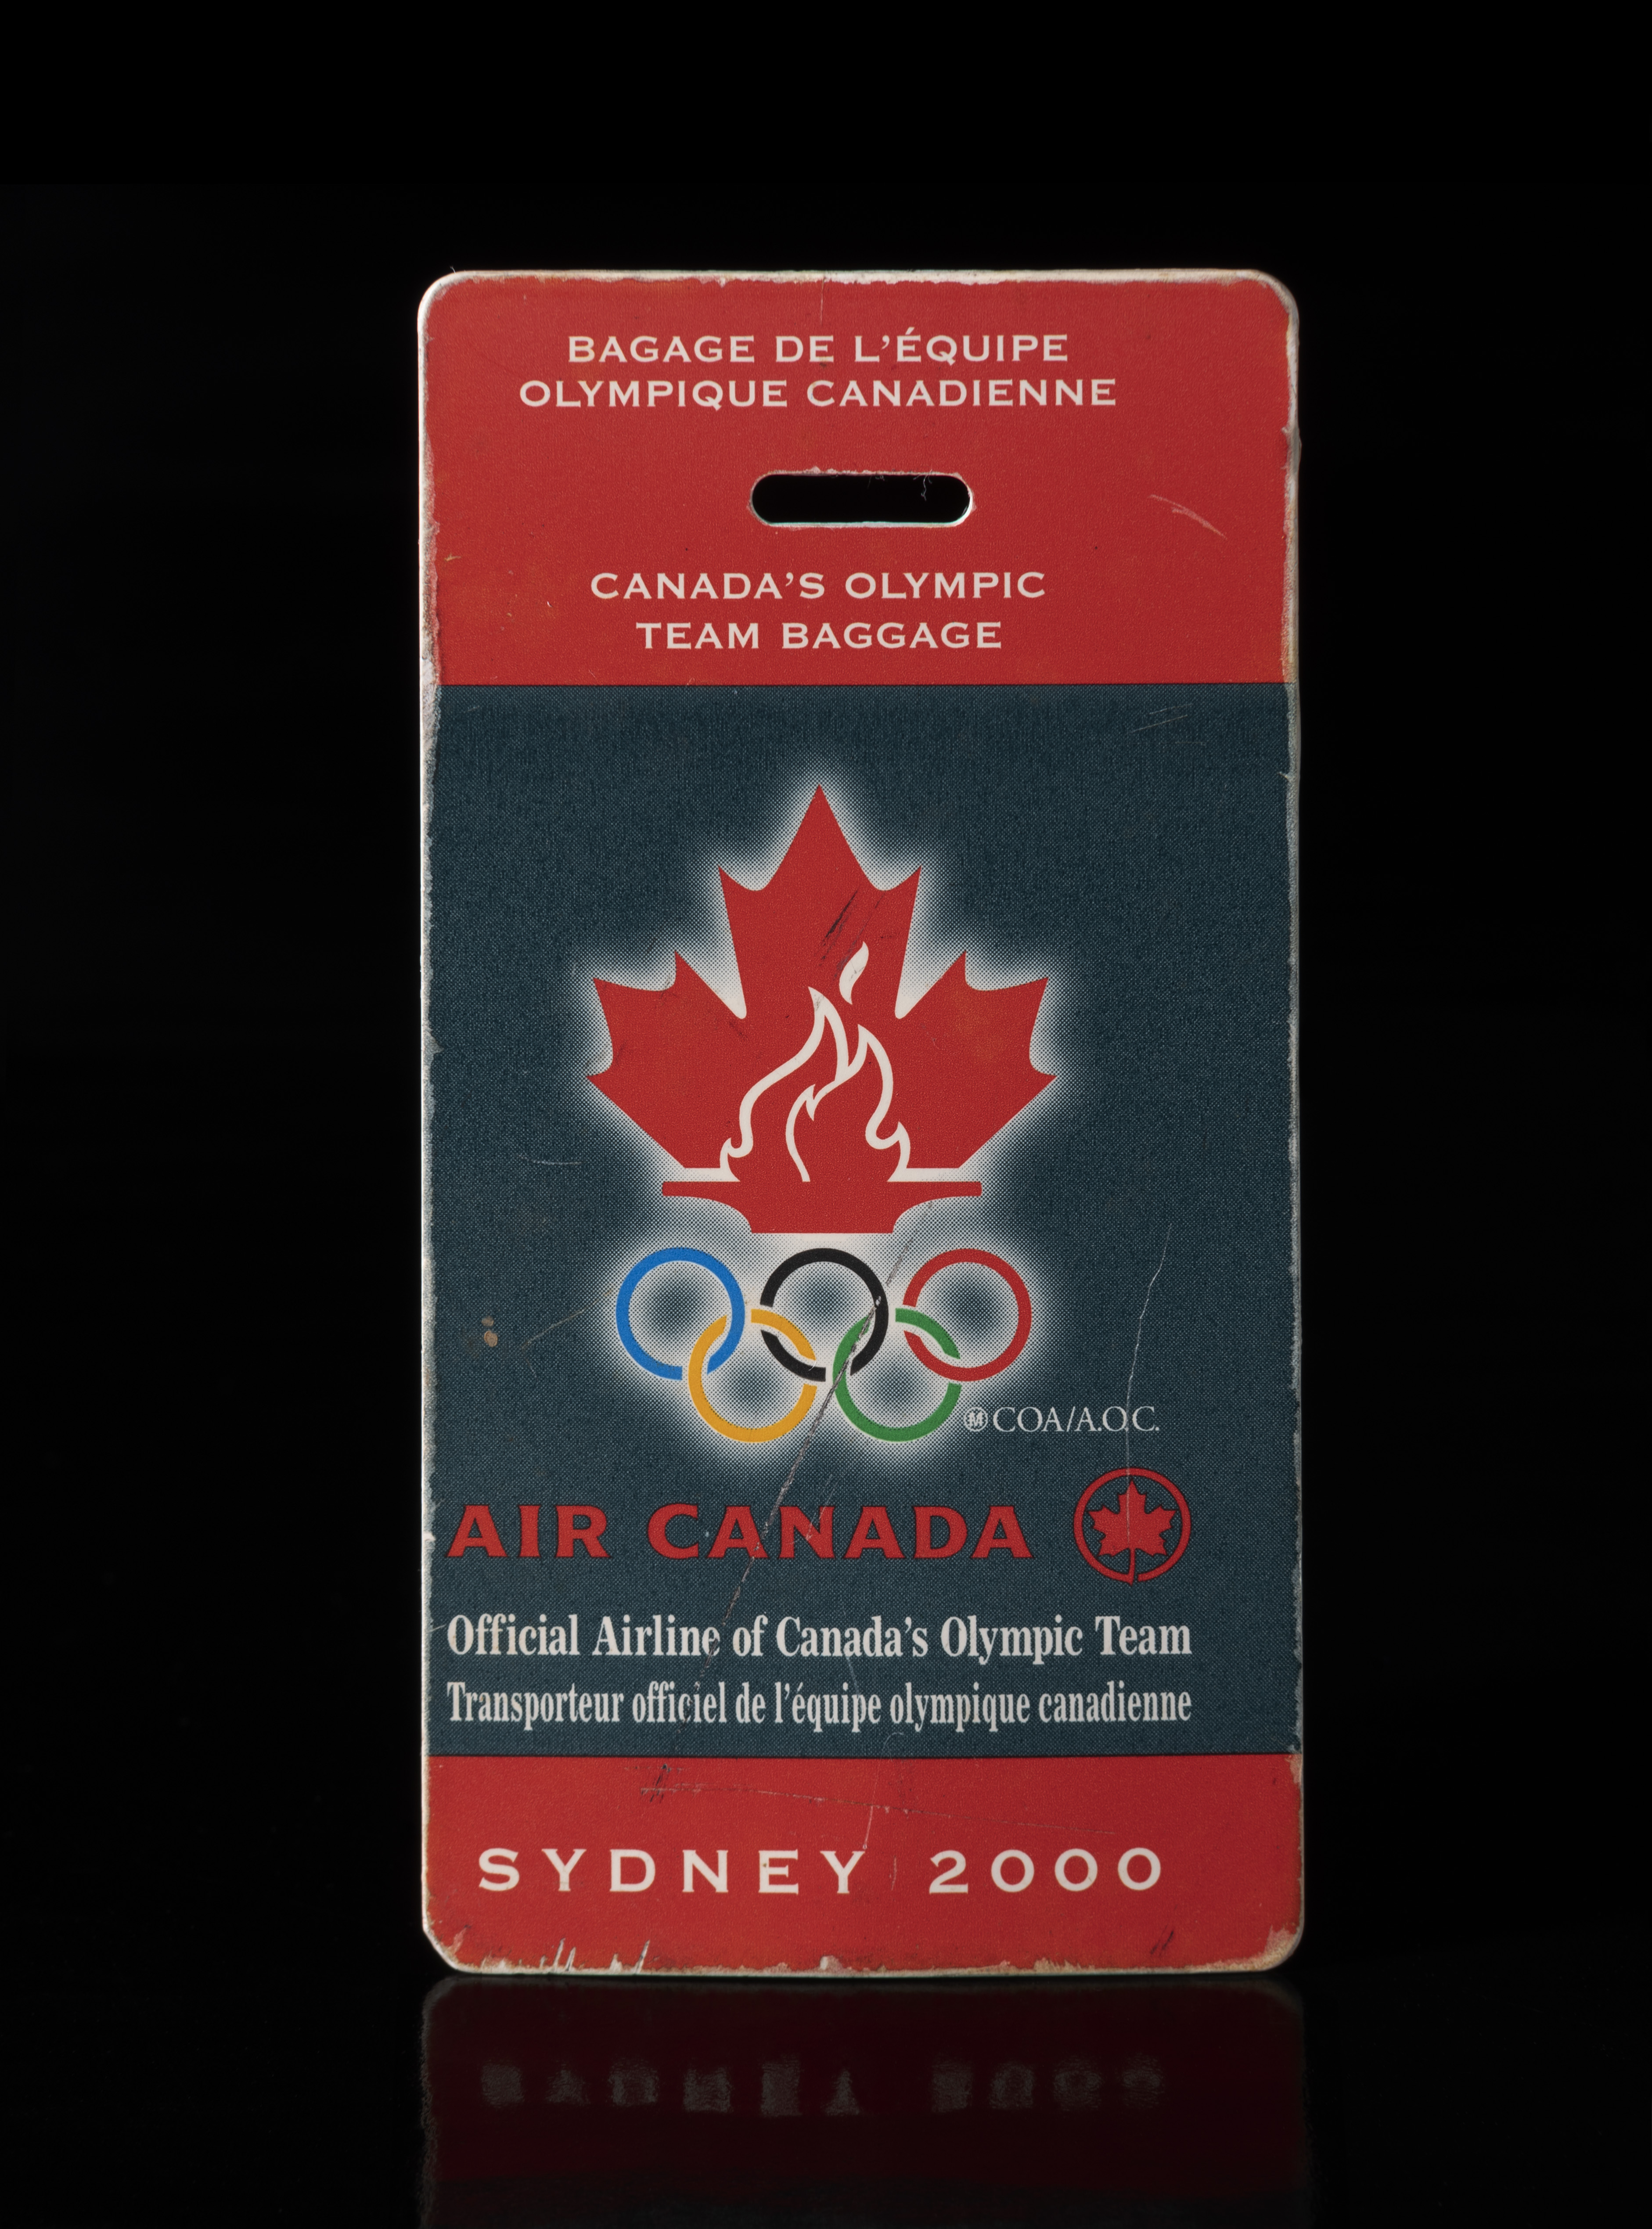 Étiquette rectangulaire bleue et rouge avec une feuille d’érable rouge et des anneaux olympiques.//Rectangular blue and red tag with a red maple leaf and Olympic rings